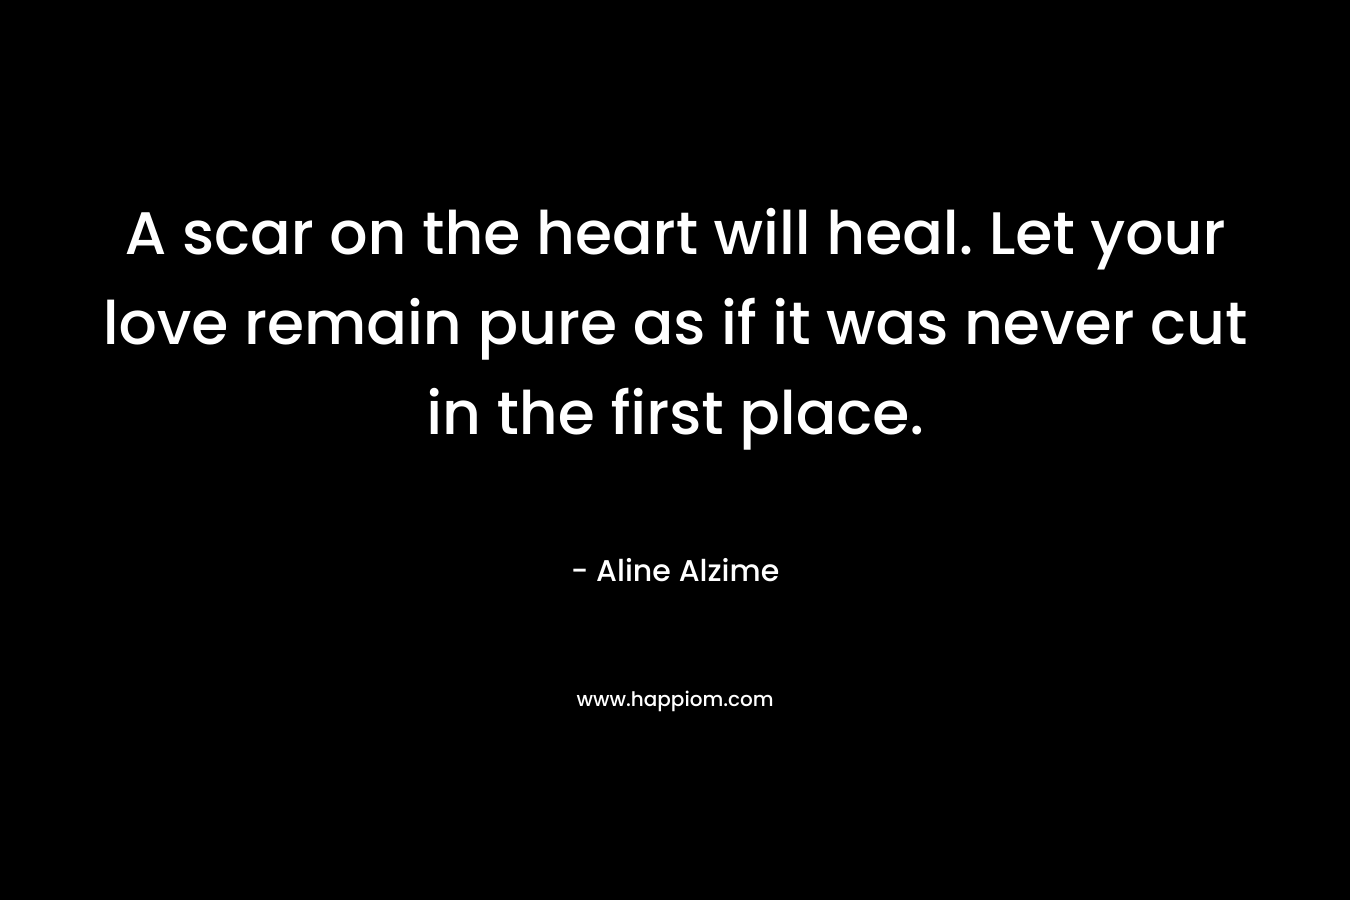 A scar on the heart will heal. Let your love remain pure as if it was never cut in the first place. – Aline Alzime